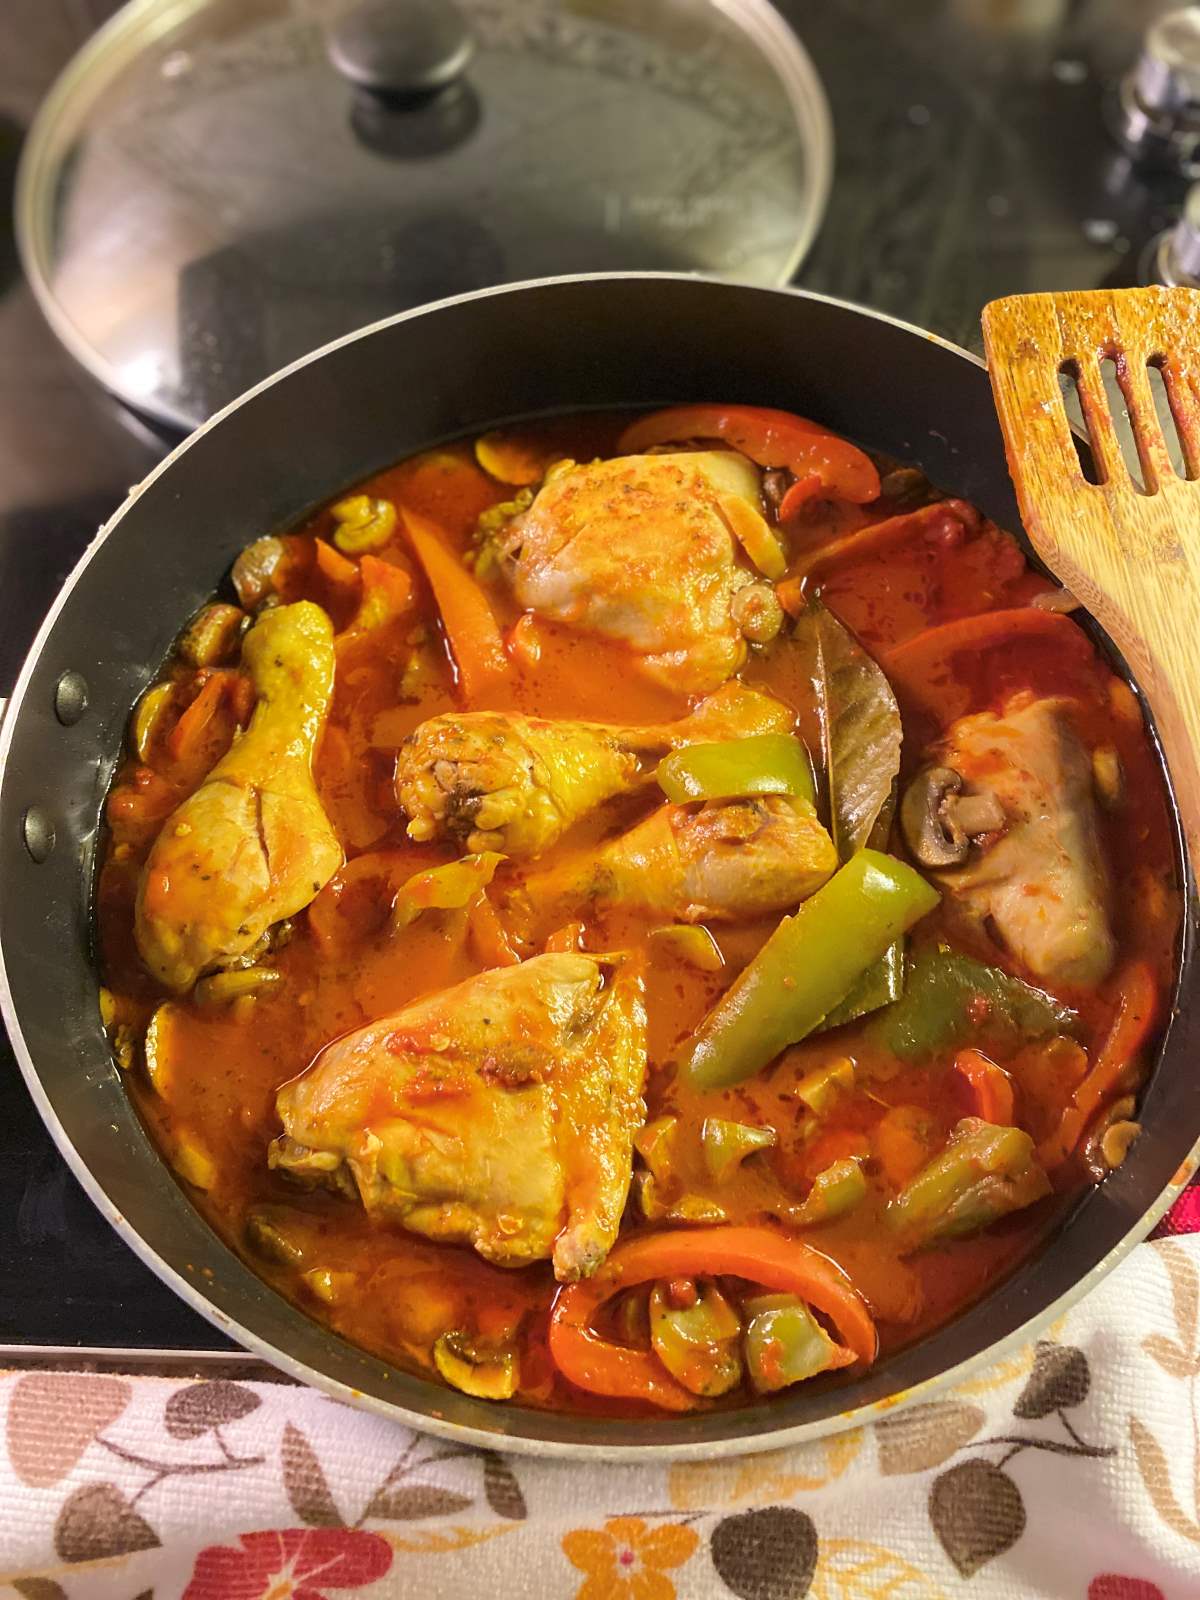 Chicken legs thighs with peppers mushrooms and sauce in a skillet cooked